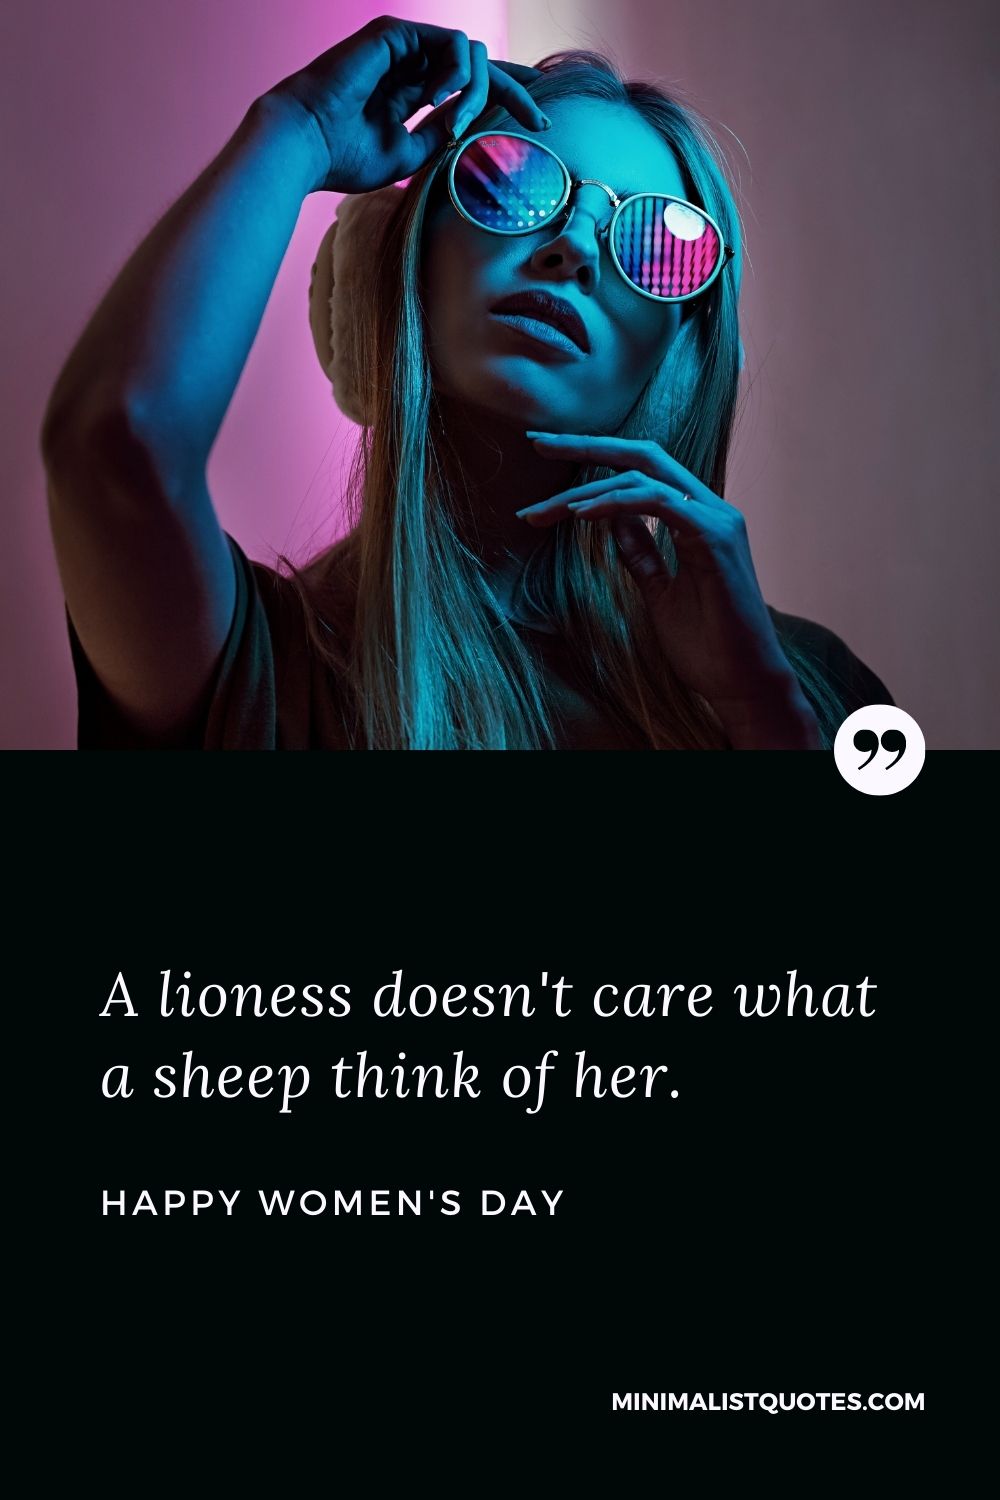 Women's Day Wish & Messages With Image: A lioness doesn't care what a sheep think of her.